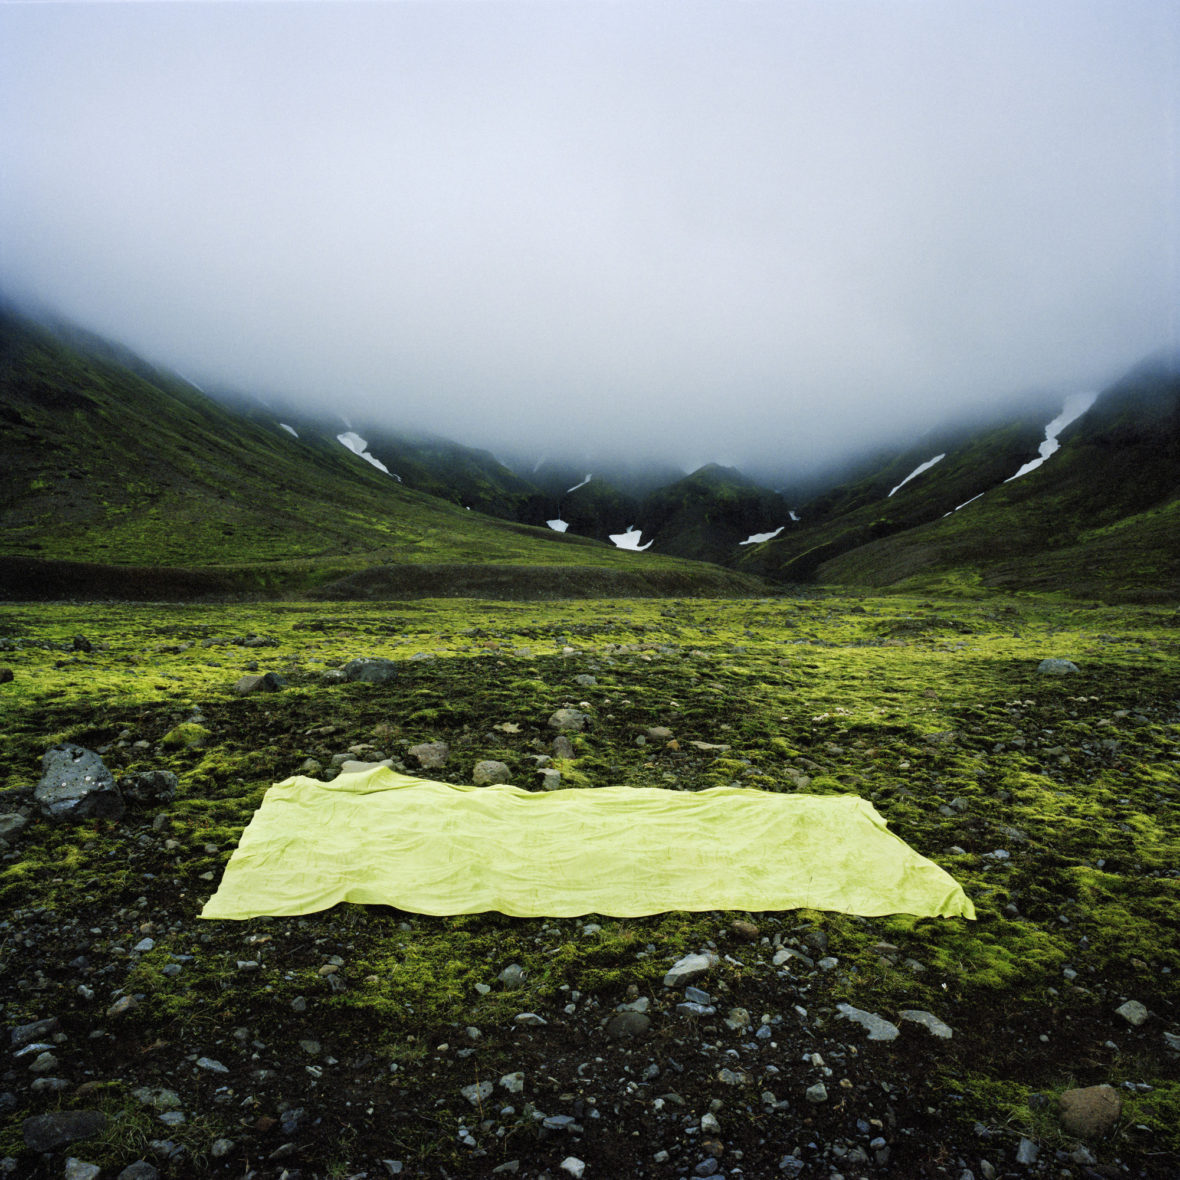 Bláfell, sarjasta/from the series Covering